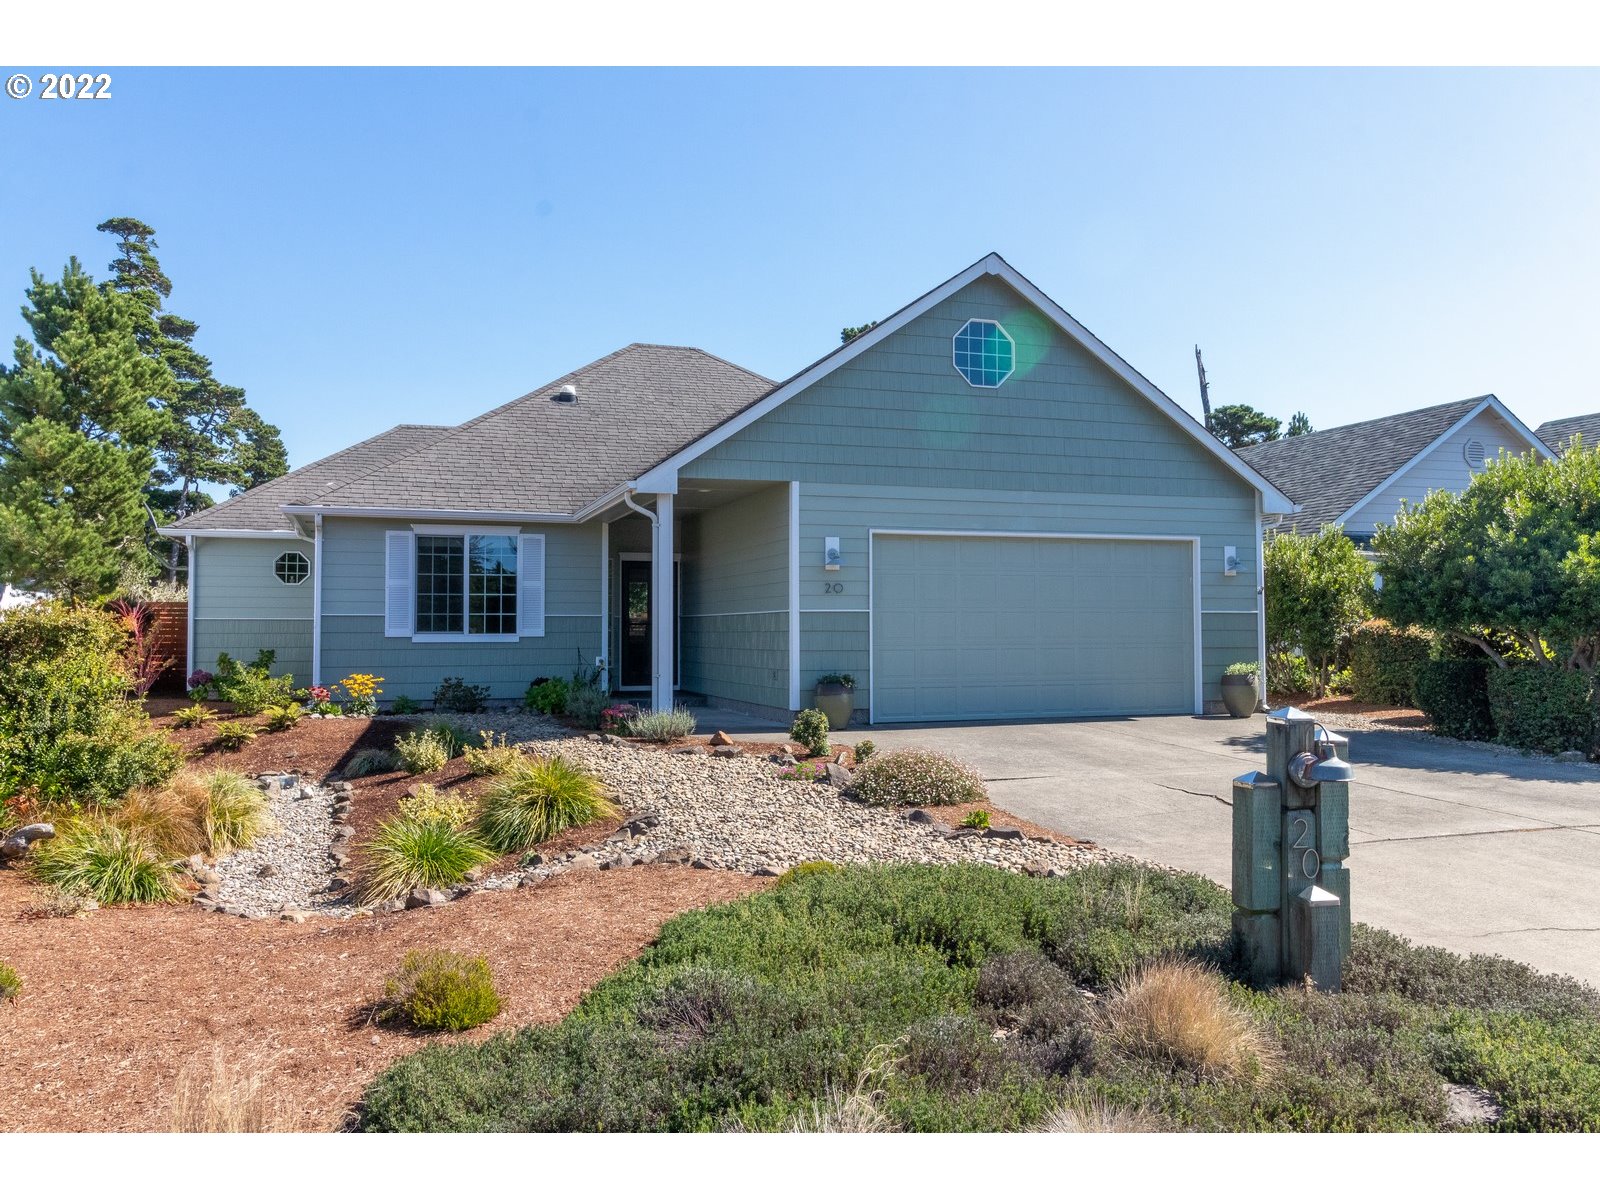 20 MARINERS LN, Florence, OR 